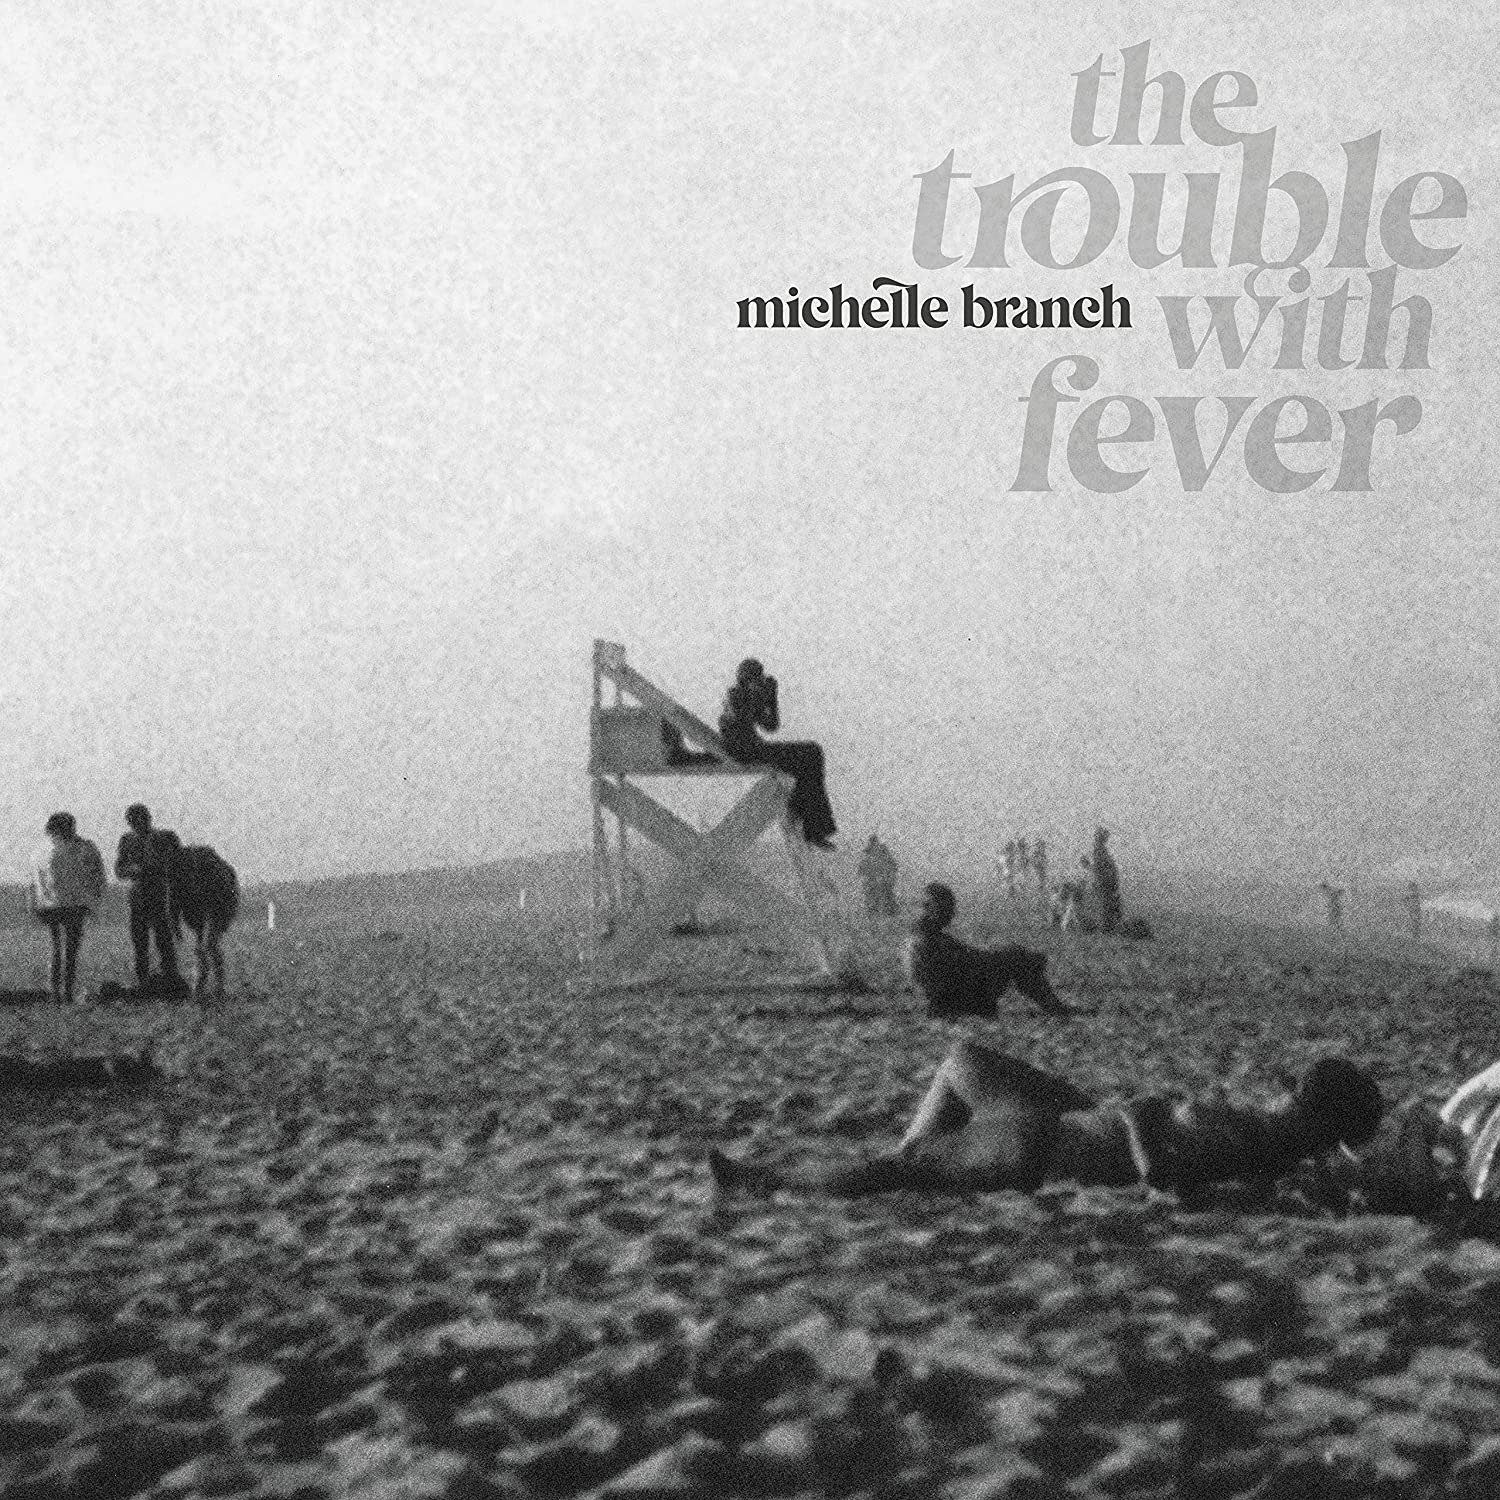 BRANCH, MICHELLE - THE TROUBLE WITH FEVER, Vinyl